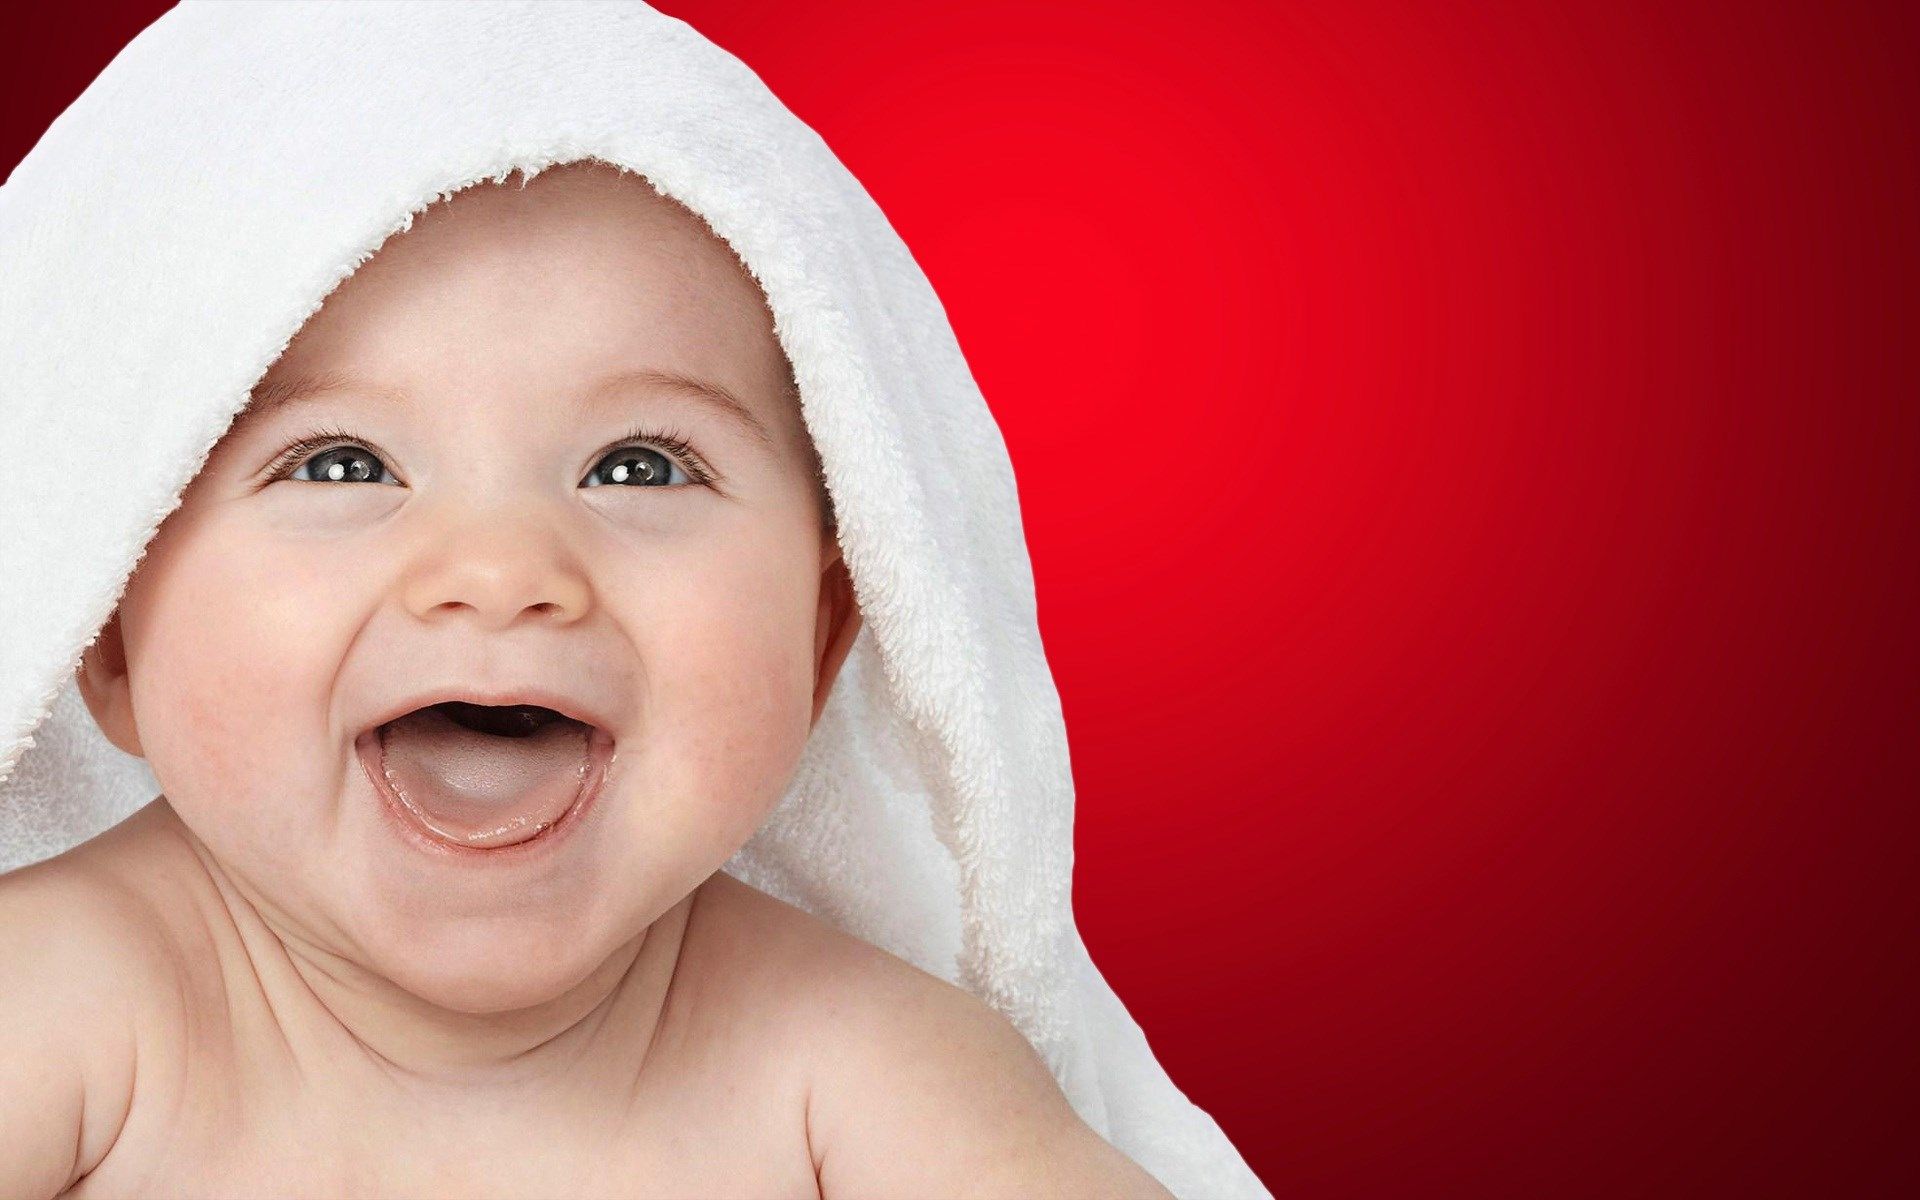 cute babies with smile wallpaper high quality. Baby wallpaper hd, Cute baby wallpaper, Baby wallpaper